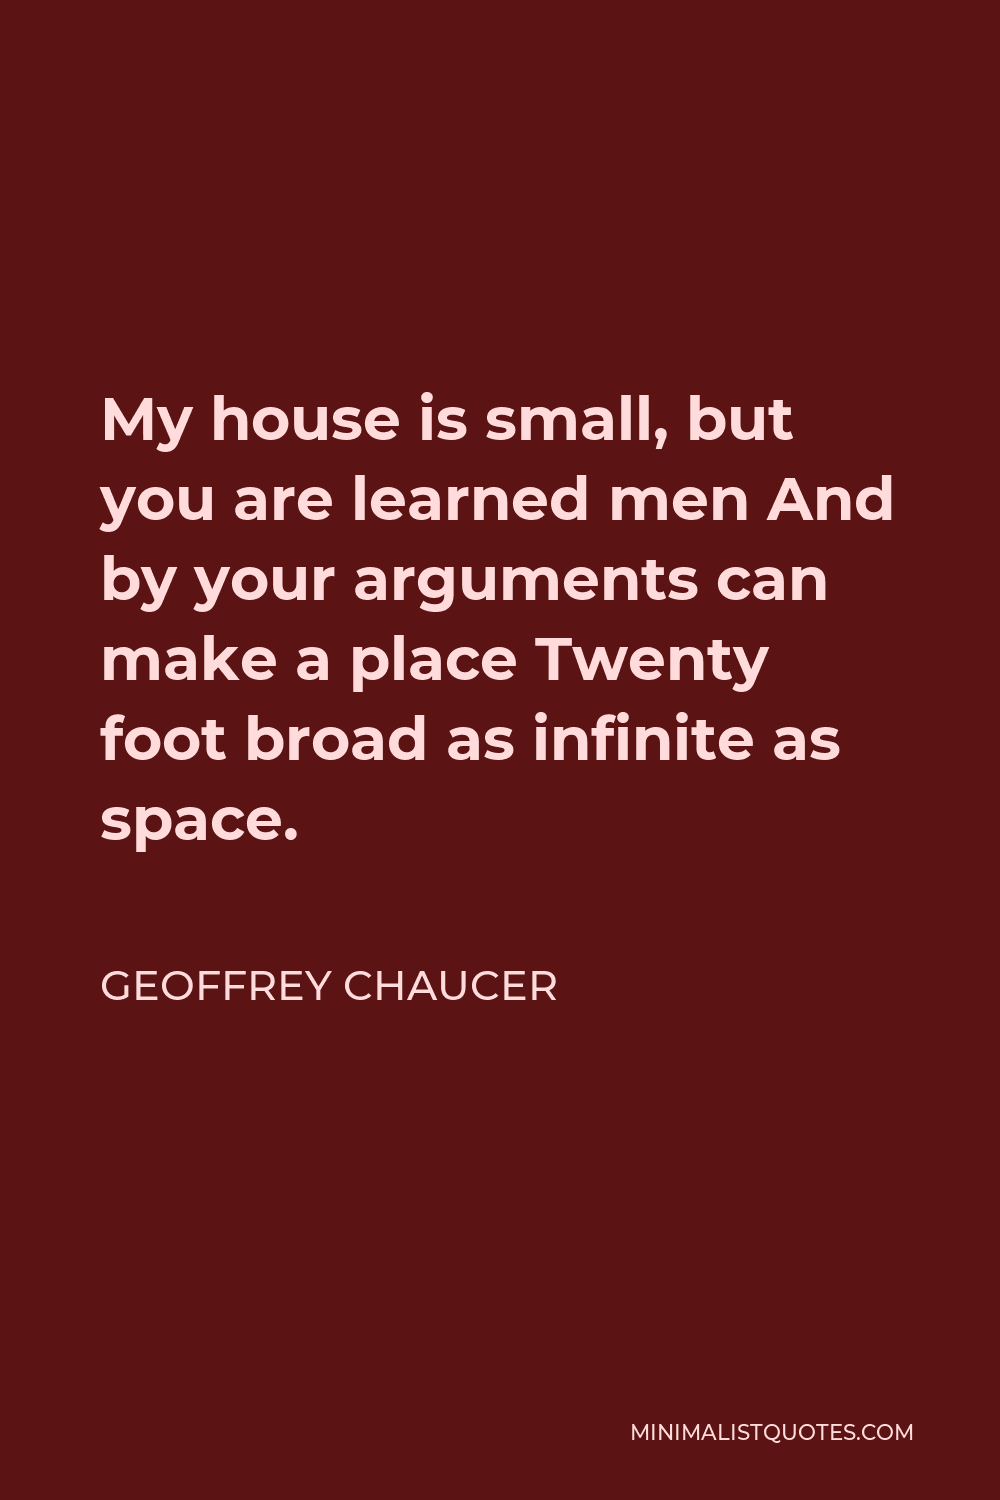 Geoffrey Chaucer Quote - My house is small, but you are learned men And by your arguments can make a place Twenty foot broad as infinite as space.